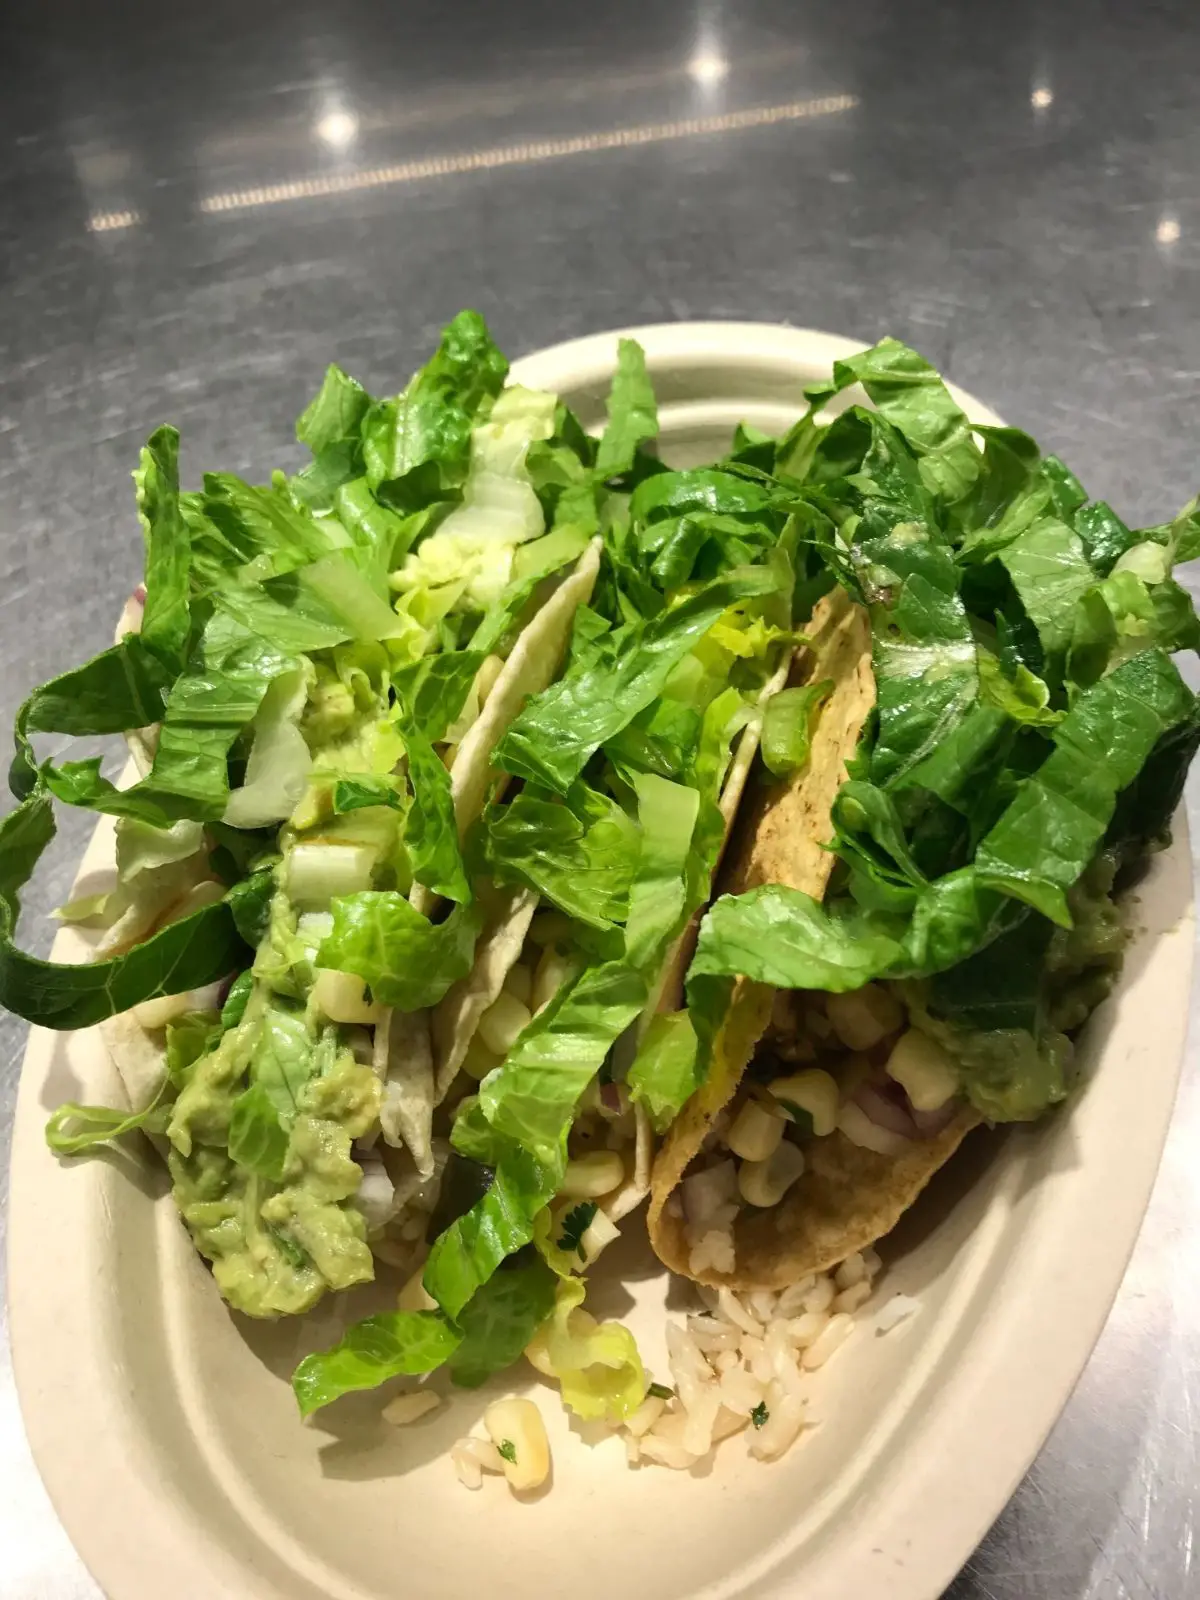 vegan tacos from chipotle in a bowl with lettuce, rice, corn, guacamole, tortillas, and a taco shell